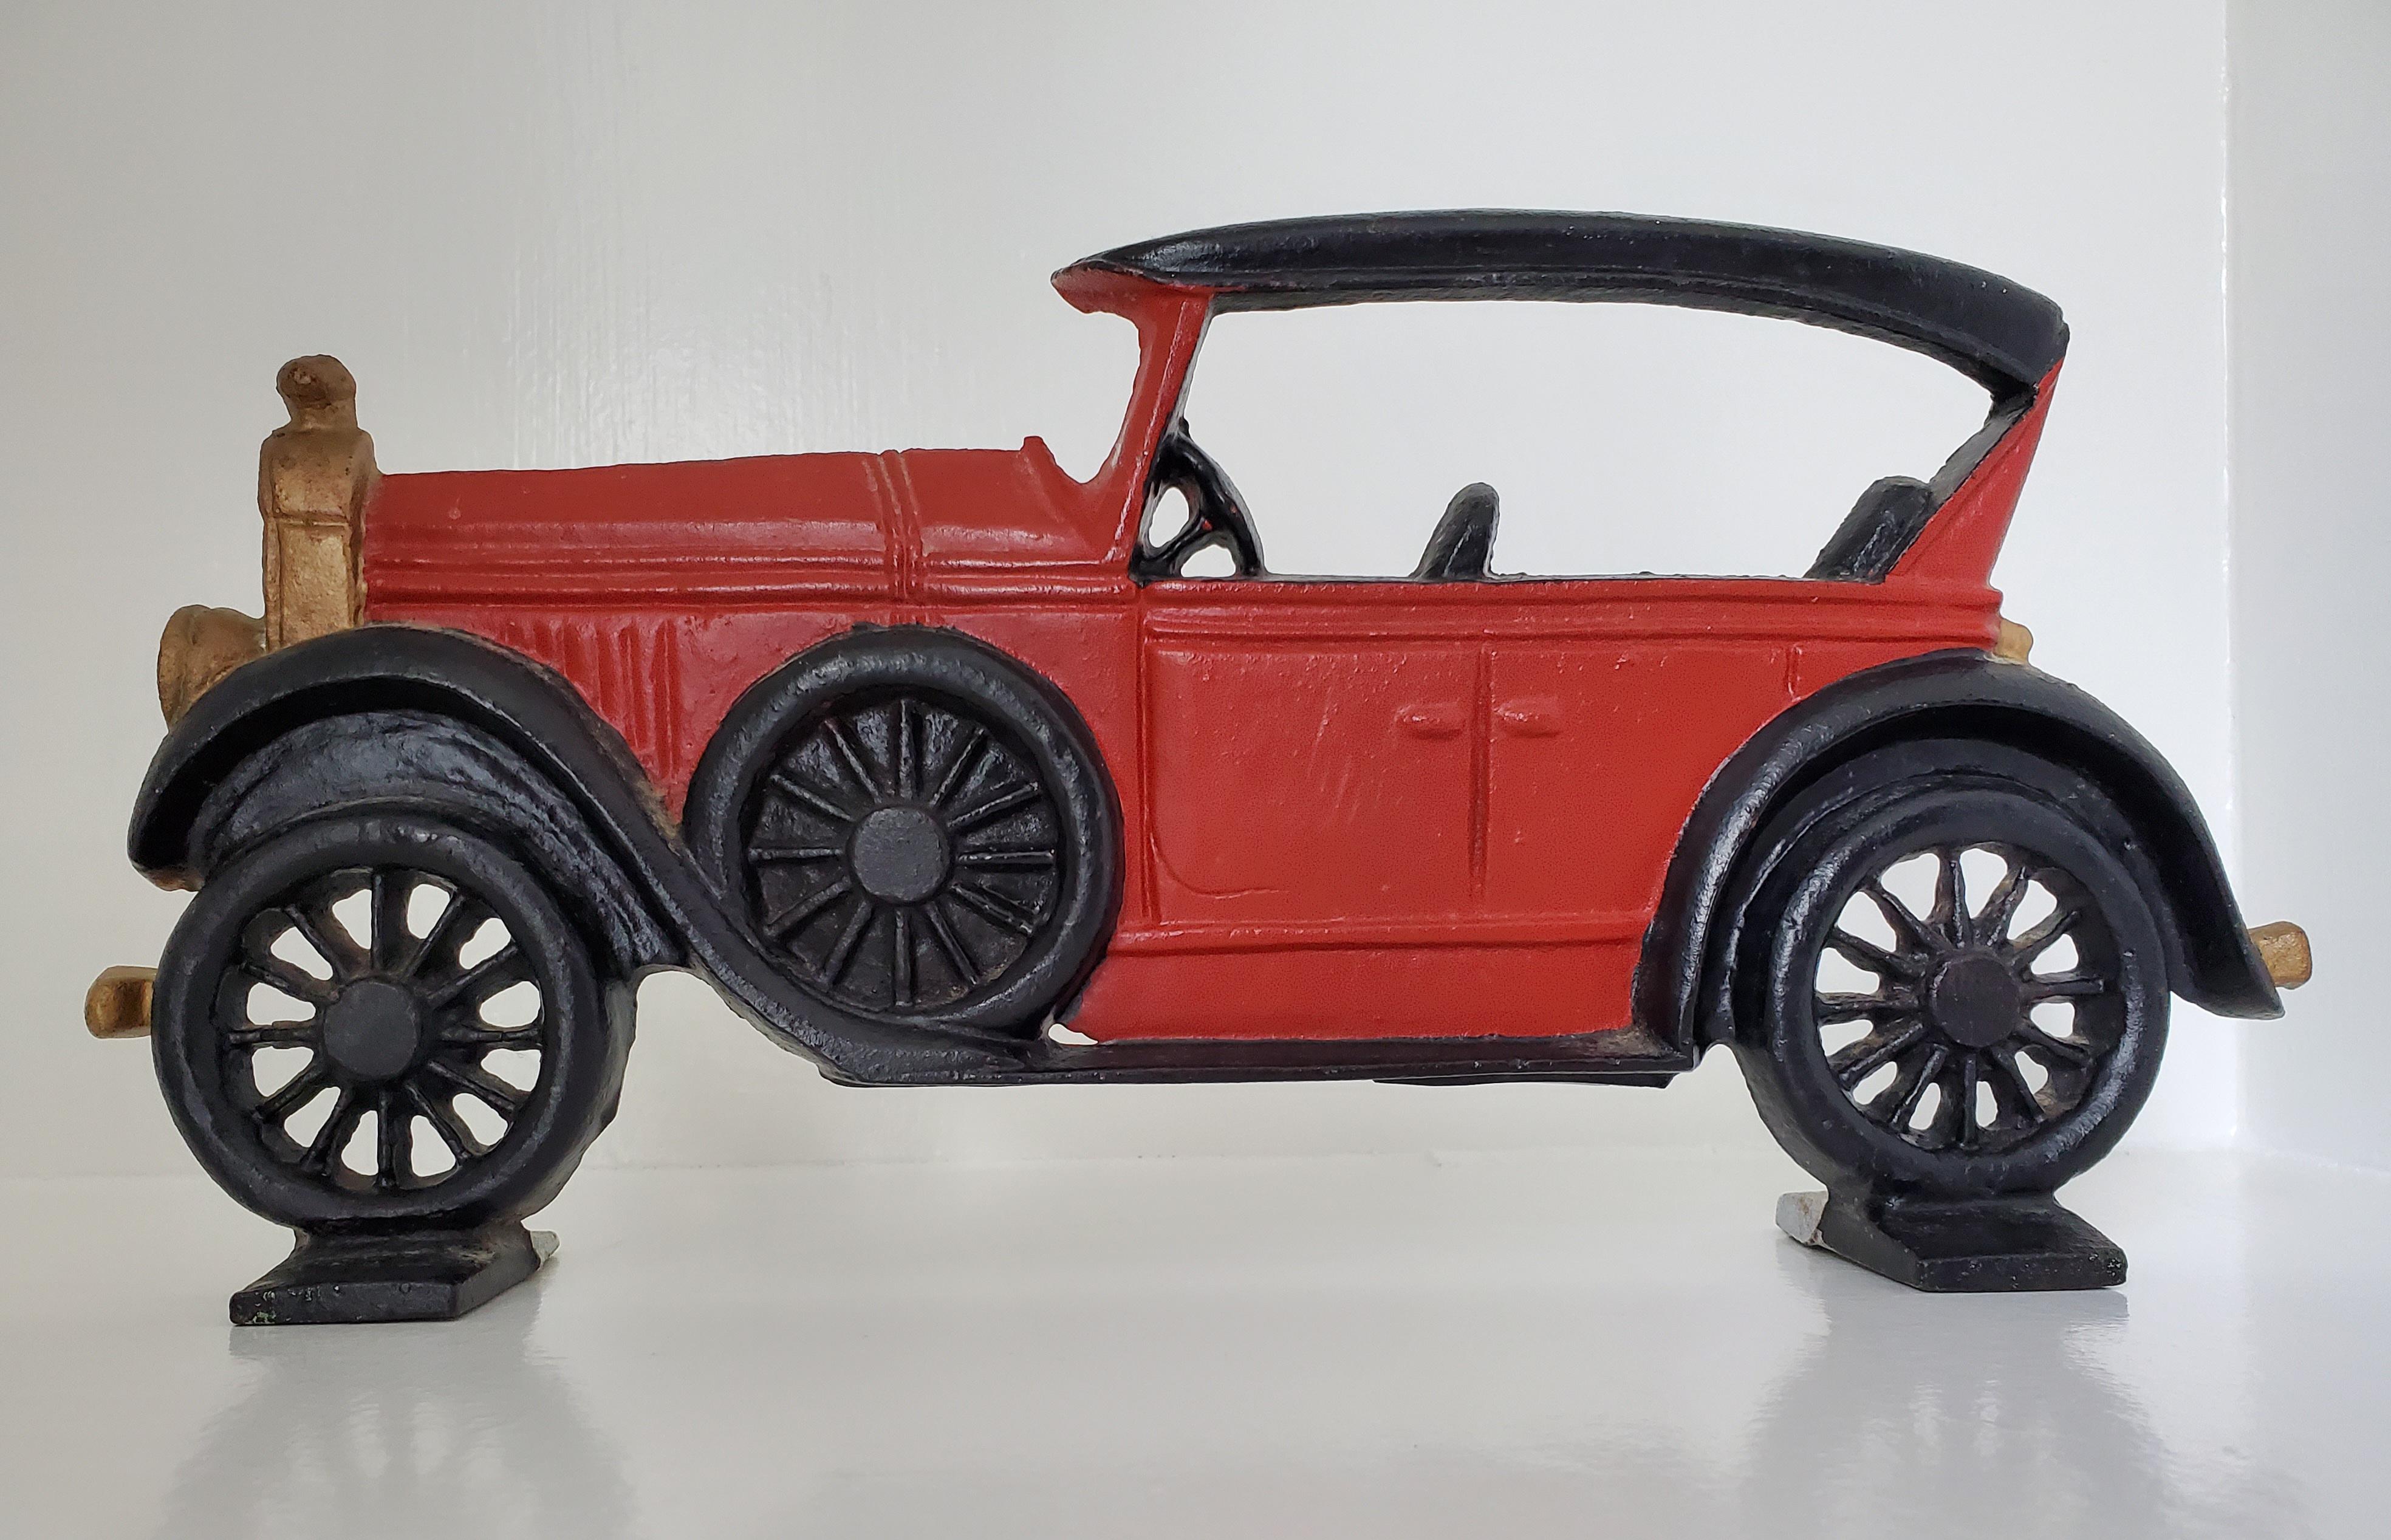 This fabulous pair of painted cast iron antique cars can be used as door stops, book ends, or shelf décor. One is a red, early Model T Ford with gold and black accents. it weighs 1481 grams and is 13 inches long, 6 inches high, and 2.5 inches wide.